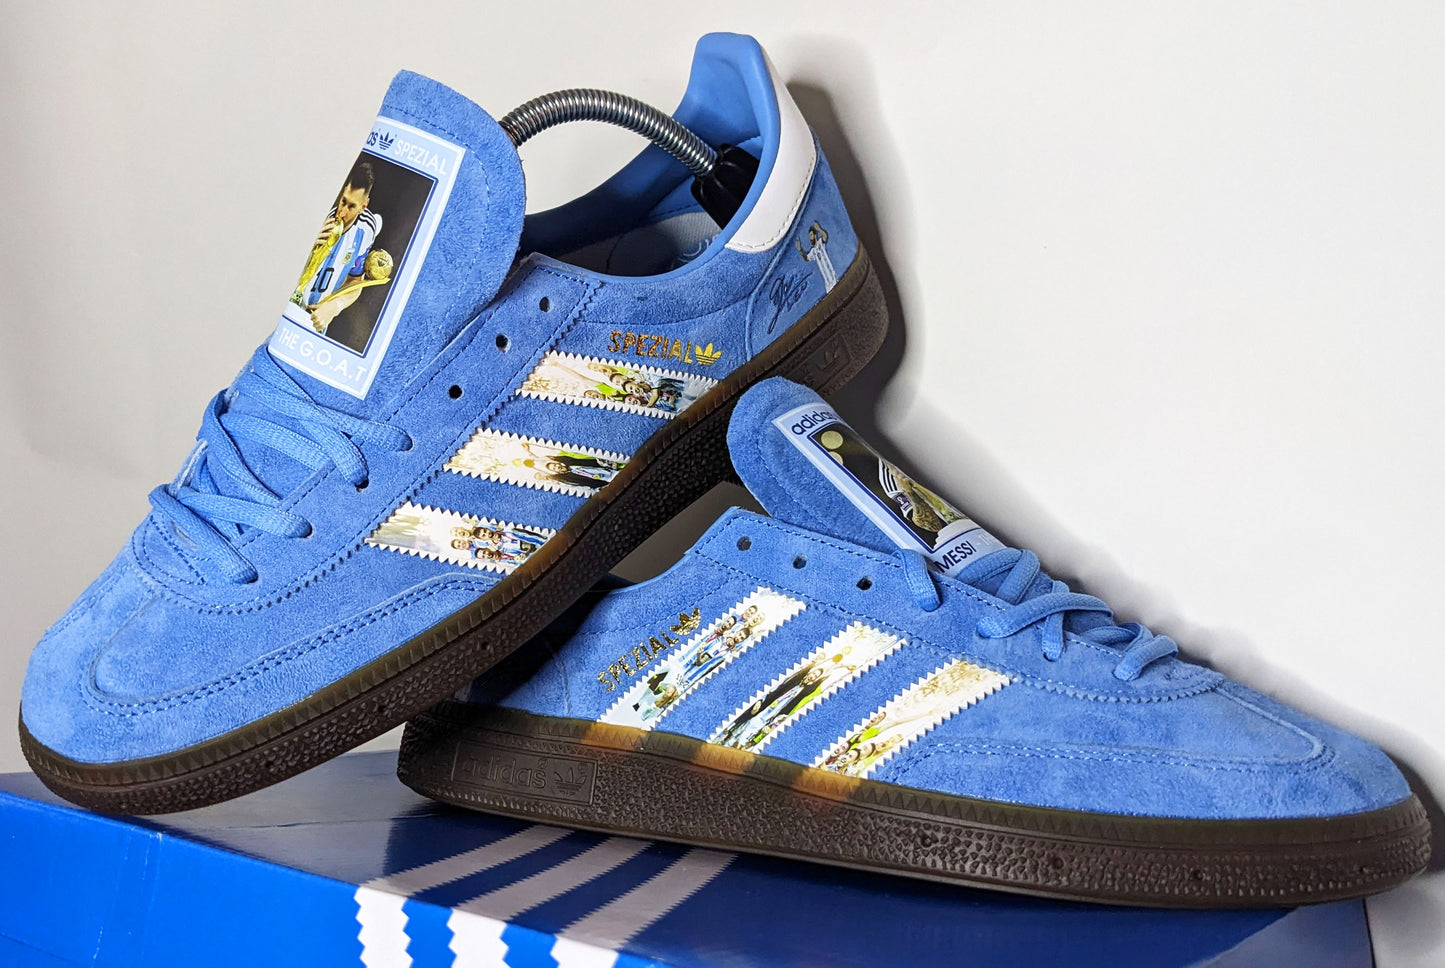 Limited edition Argentina Messi The GOAT blue / white Adidas custom Handball Spezial trainers /sneakers